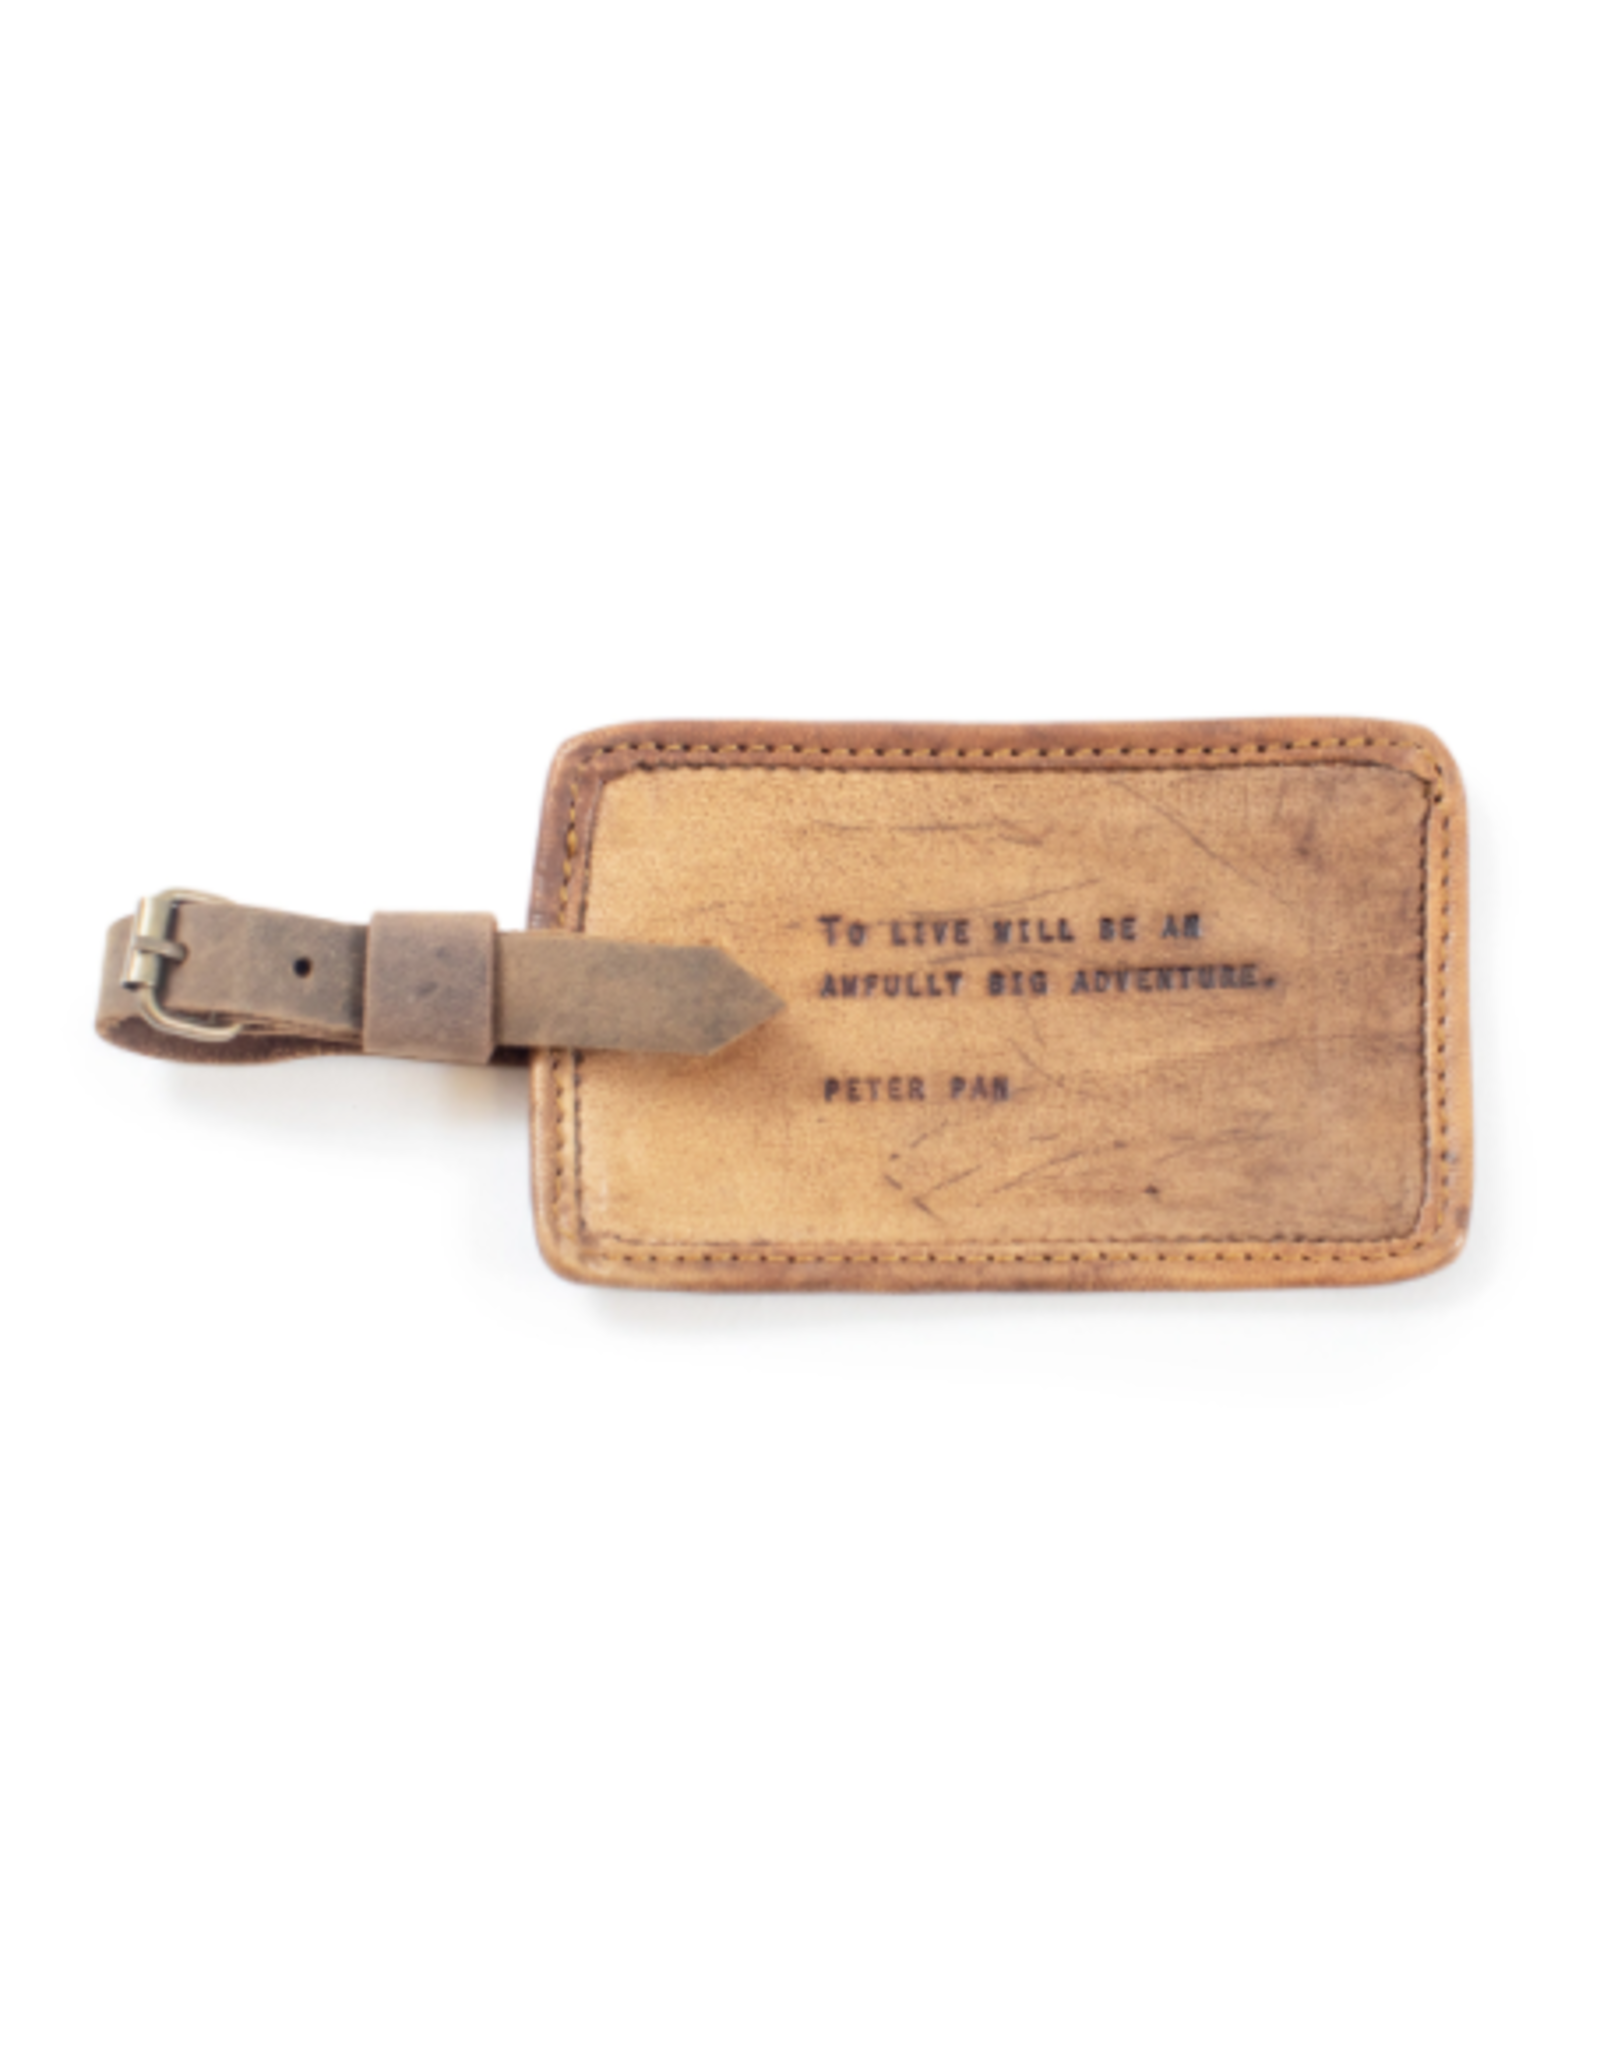 Sugarboo & Co Leather Luggage Tag, Peter Pan